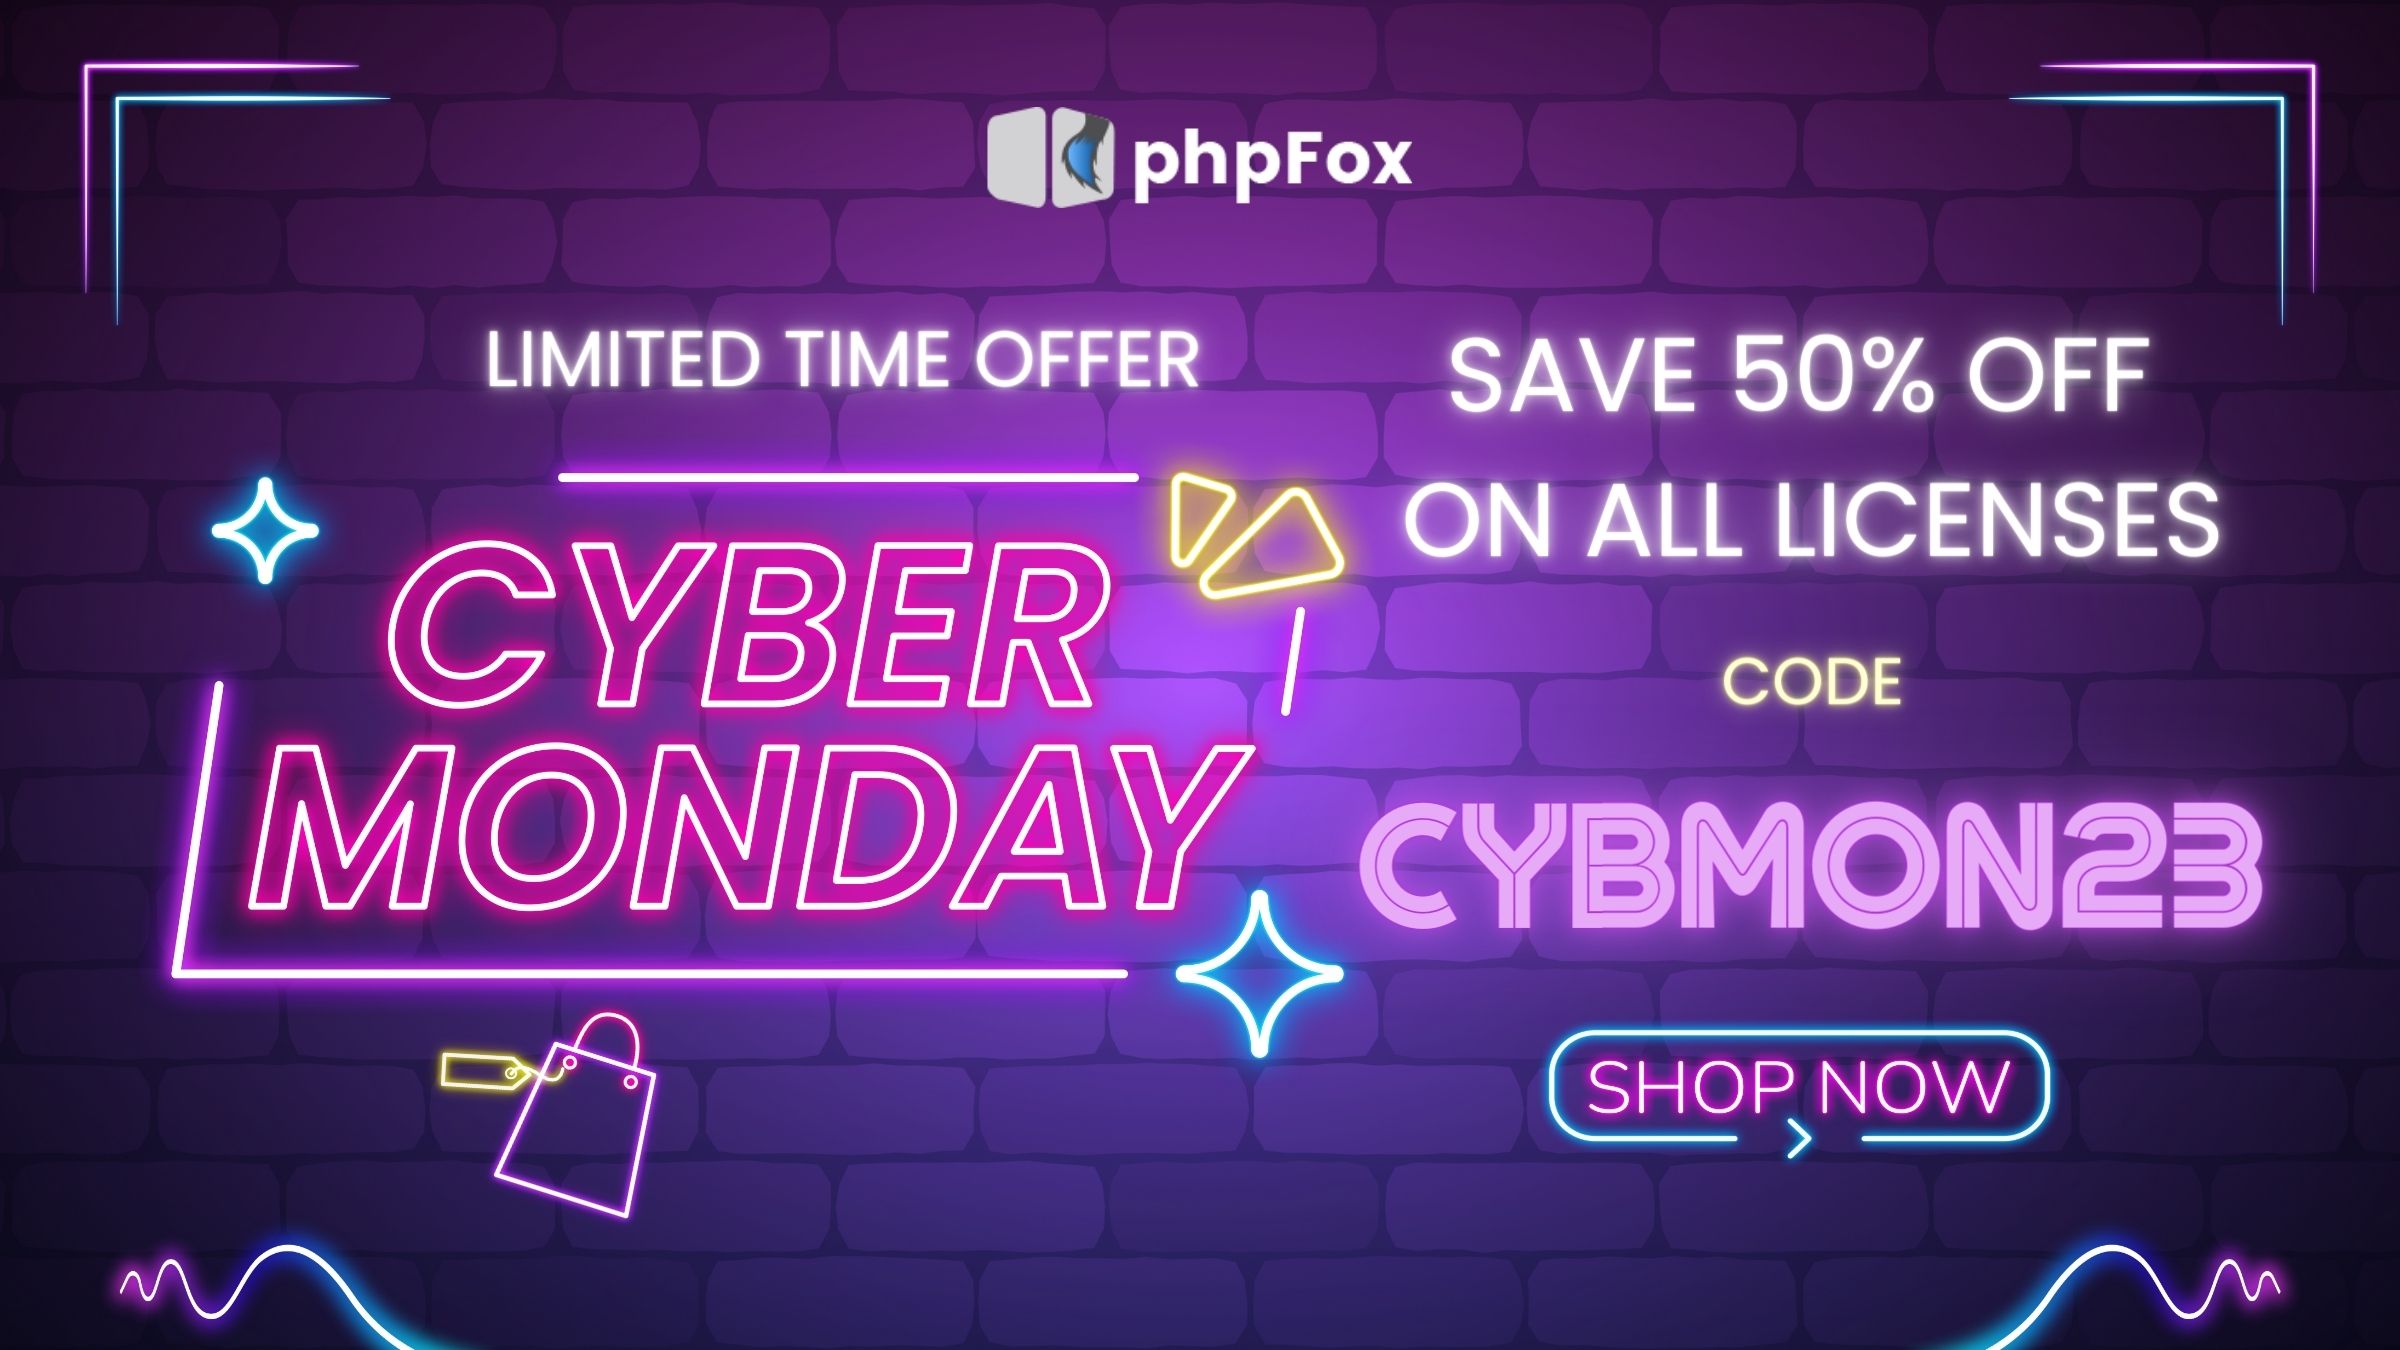 phpFox Cyber Monday Flash Sale – Get 50% Off!